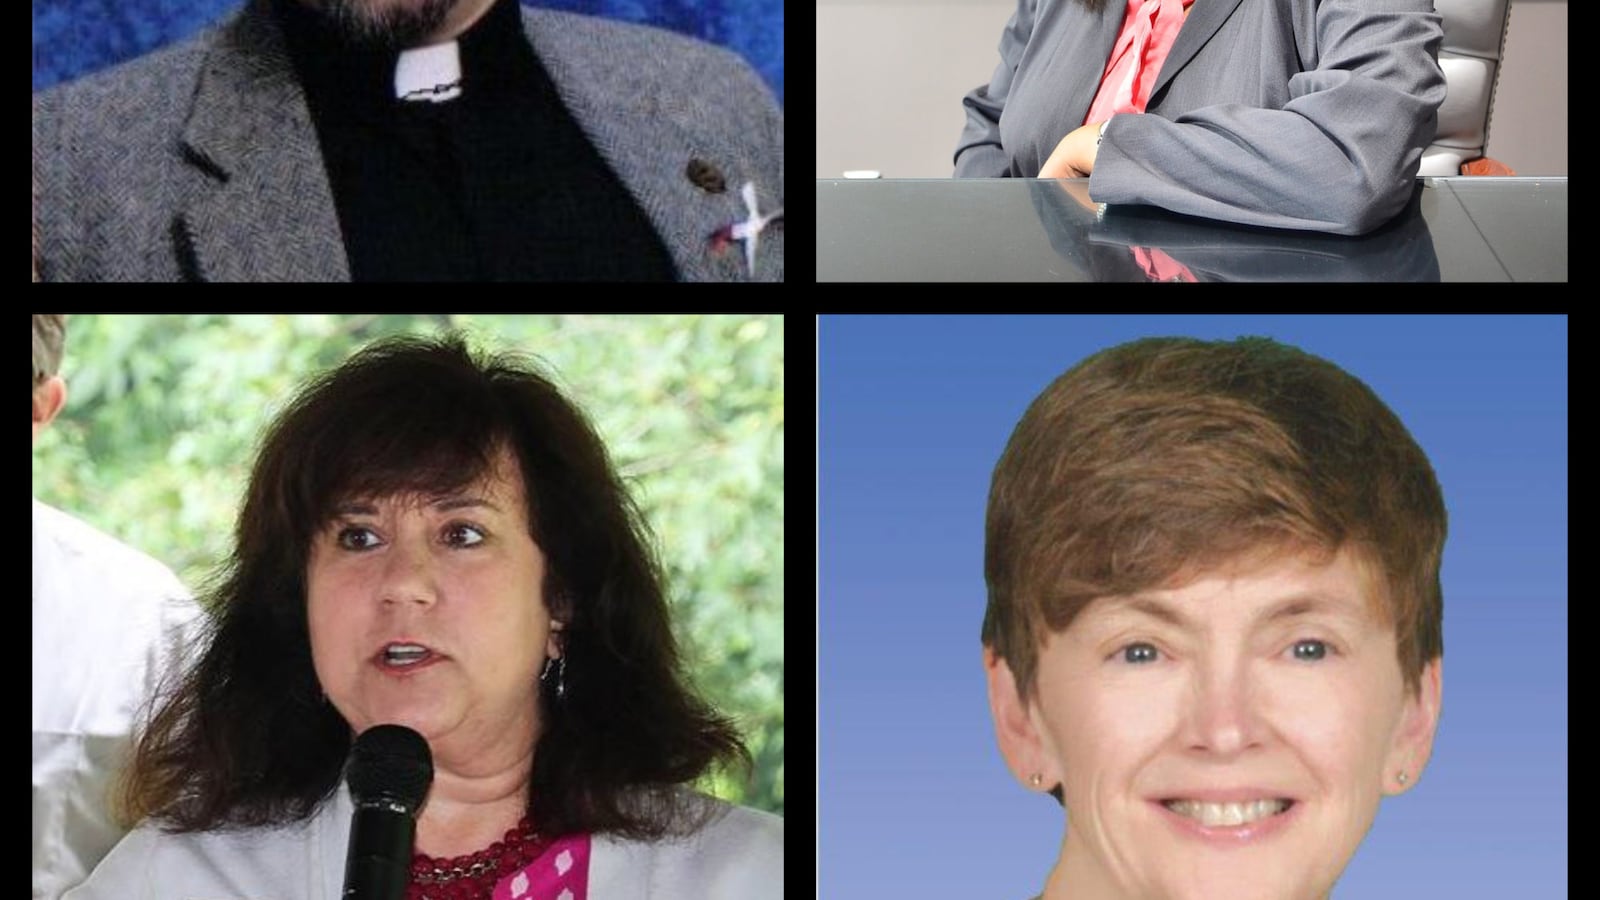 Candidates for state board of education, clockwise from top right: Tiffany Tilley, Judy Pritchett, Tami Carlone, Richard Zeile.